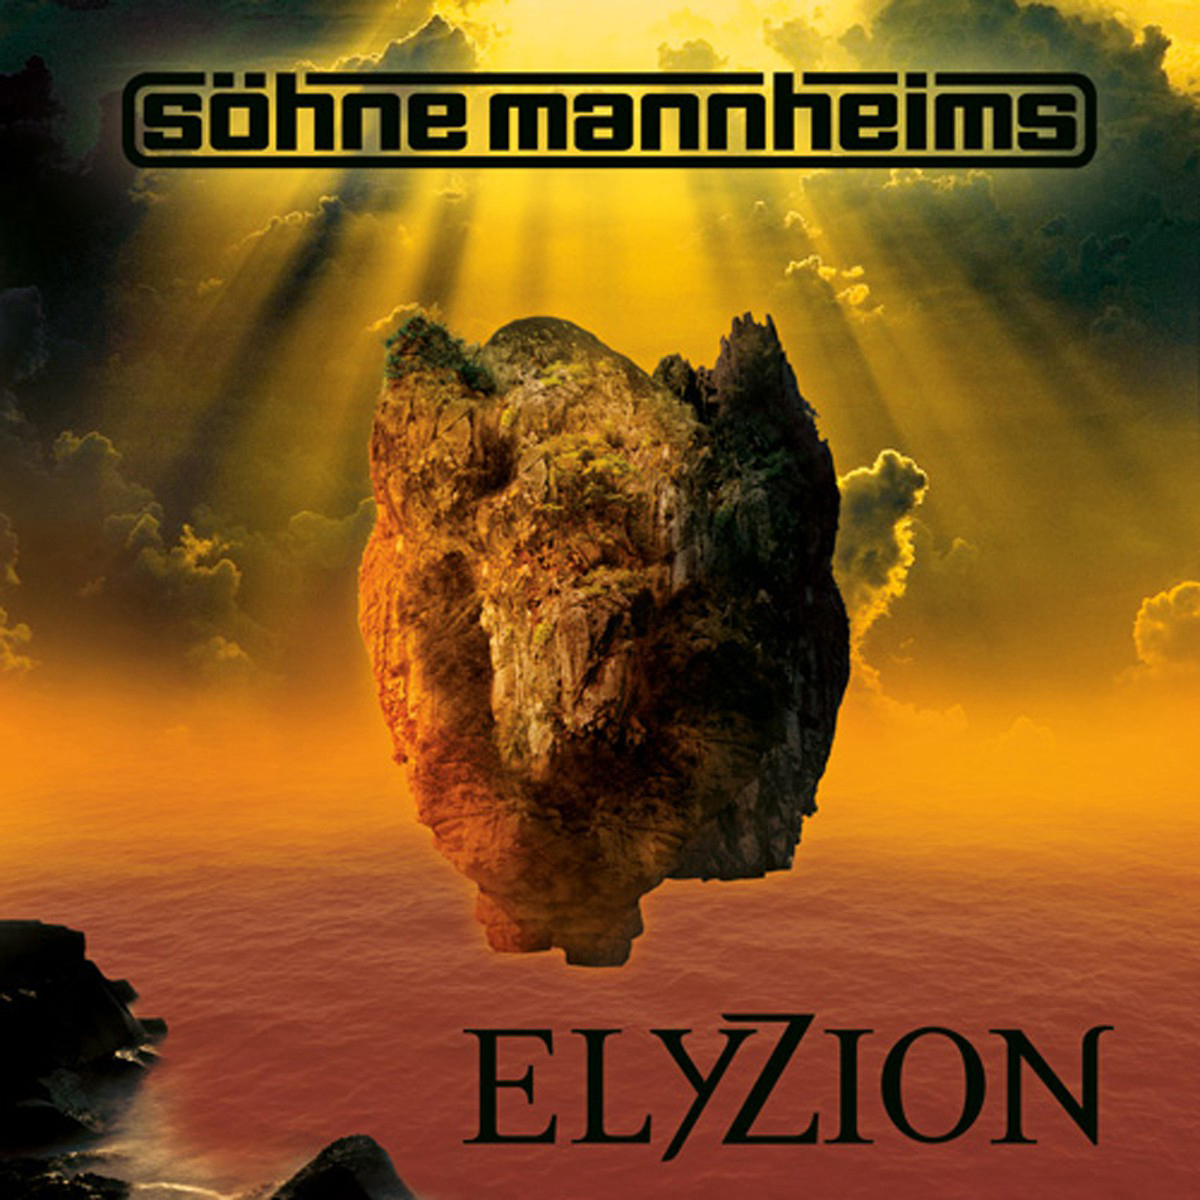 Söhne Mannheims - + Audio) Elyzion (Deluxe (CD - DVD Edition)